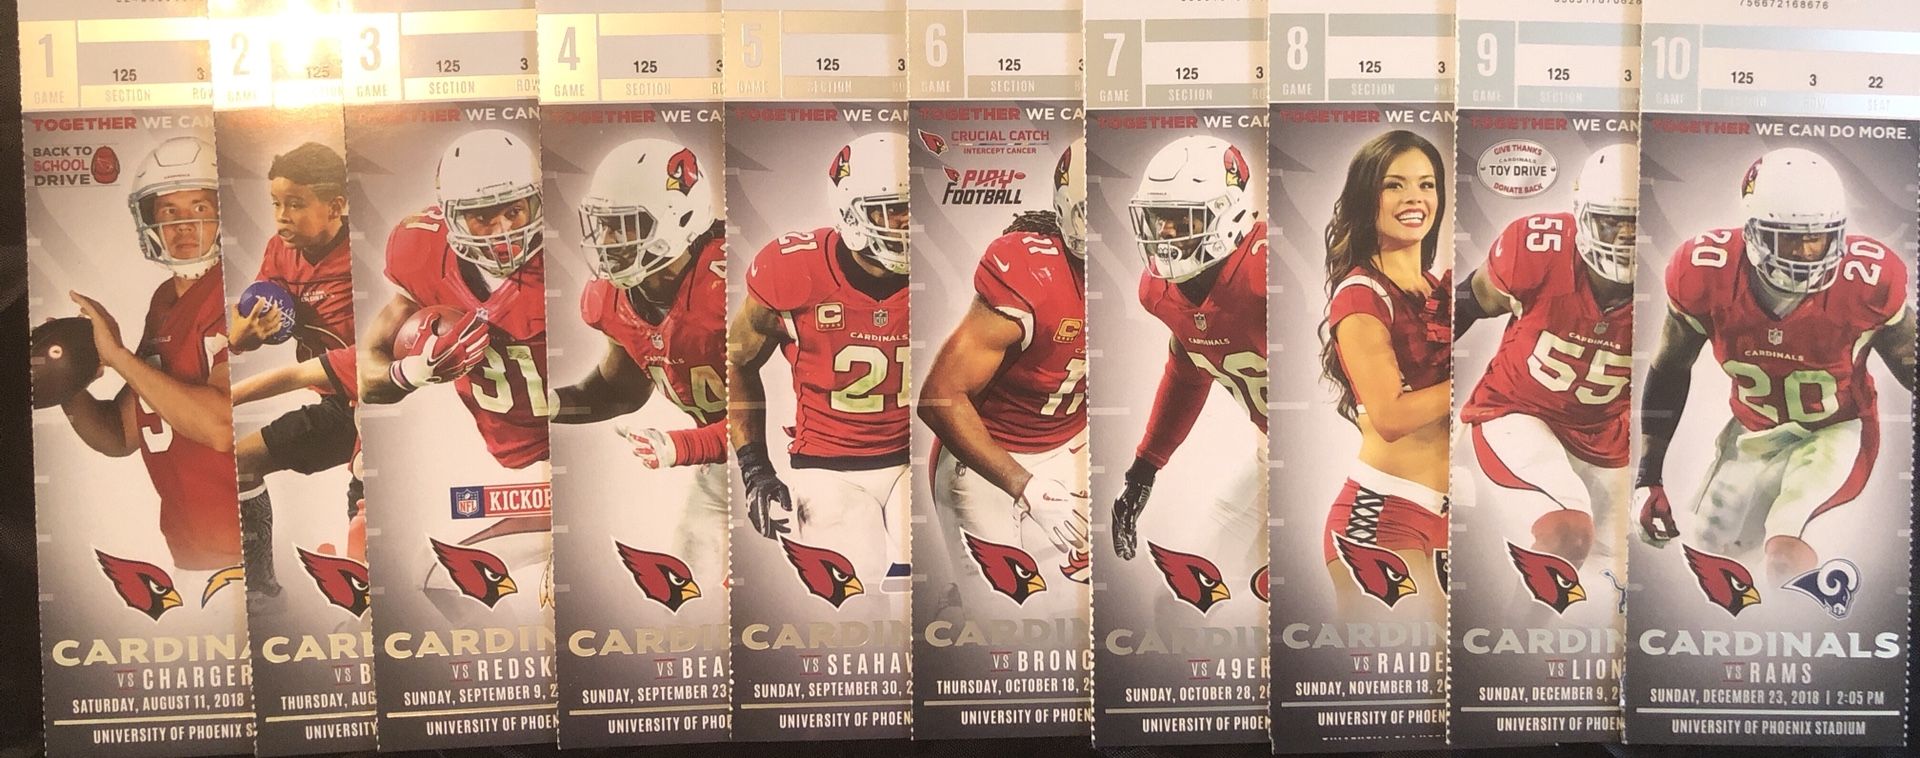 ARIZONA CARDINALS 3RD ROW VISITOR SIDE 5 YD LINE AISLE TICKETS EVERY HOME GAME